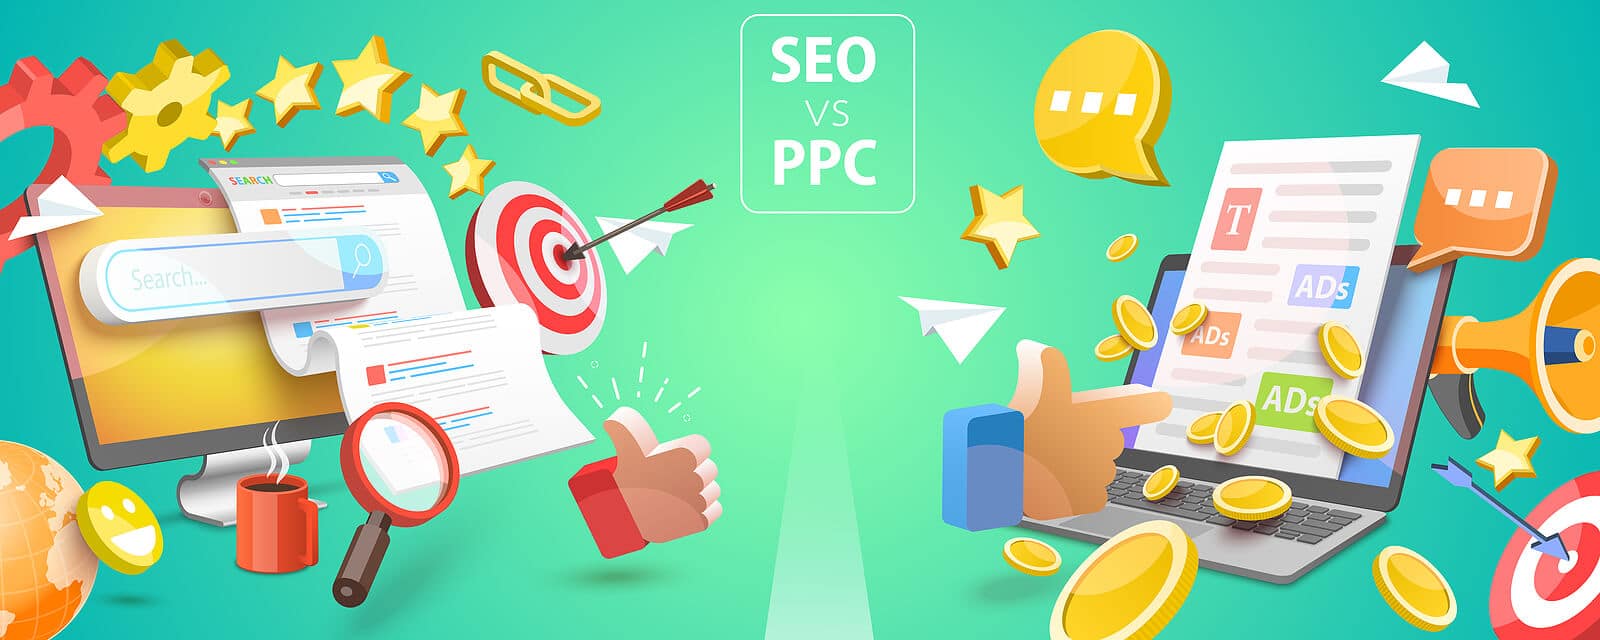 Cartoon Picture of SEO vs. PPC ads with various tools shown. If your are just beginning your SEO journey, understanding the differences organic SEO and PPC is key. Let Simplified SEO Consulting help you!